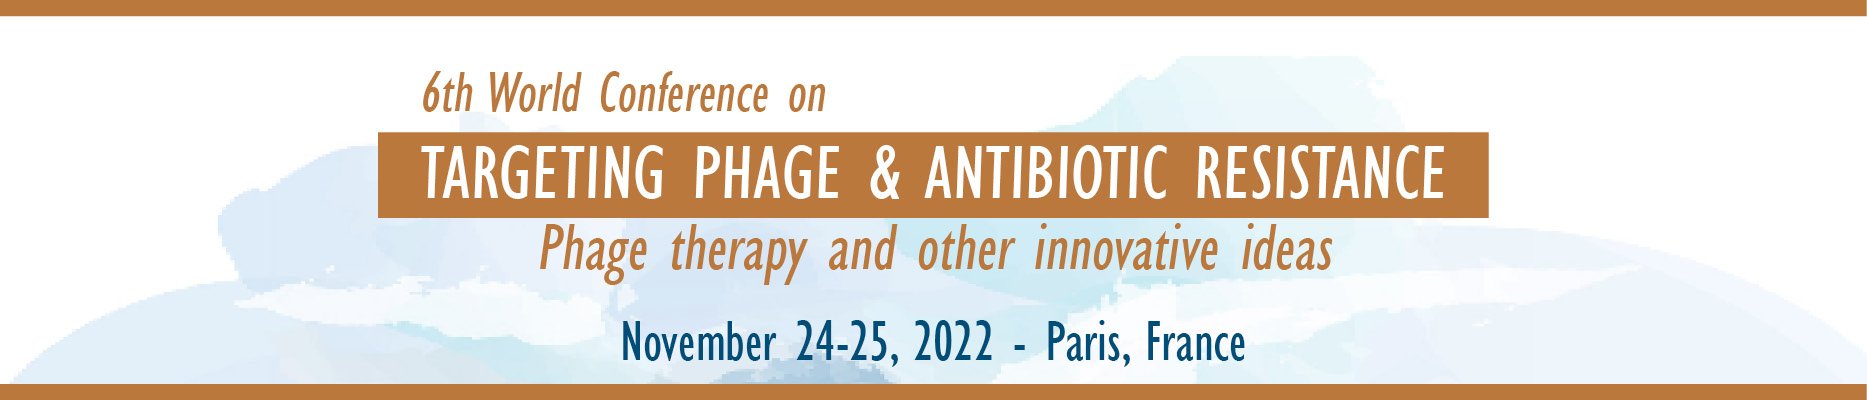 6th World Congress of the Targeting Infectious Diseases Society - November 24-25, 2022 - Paris, France